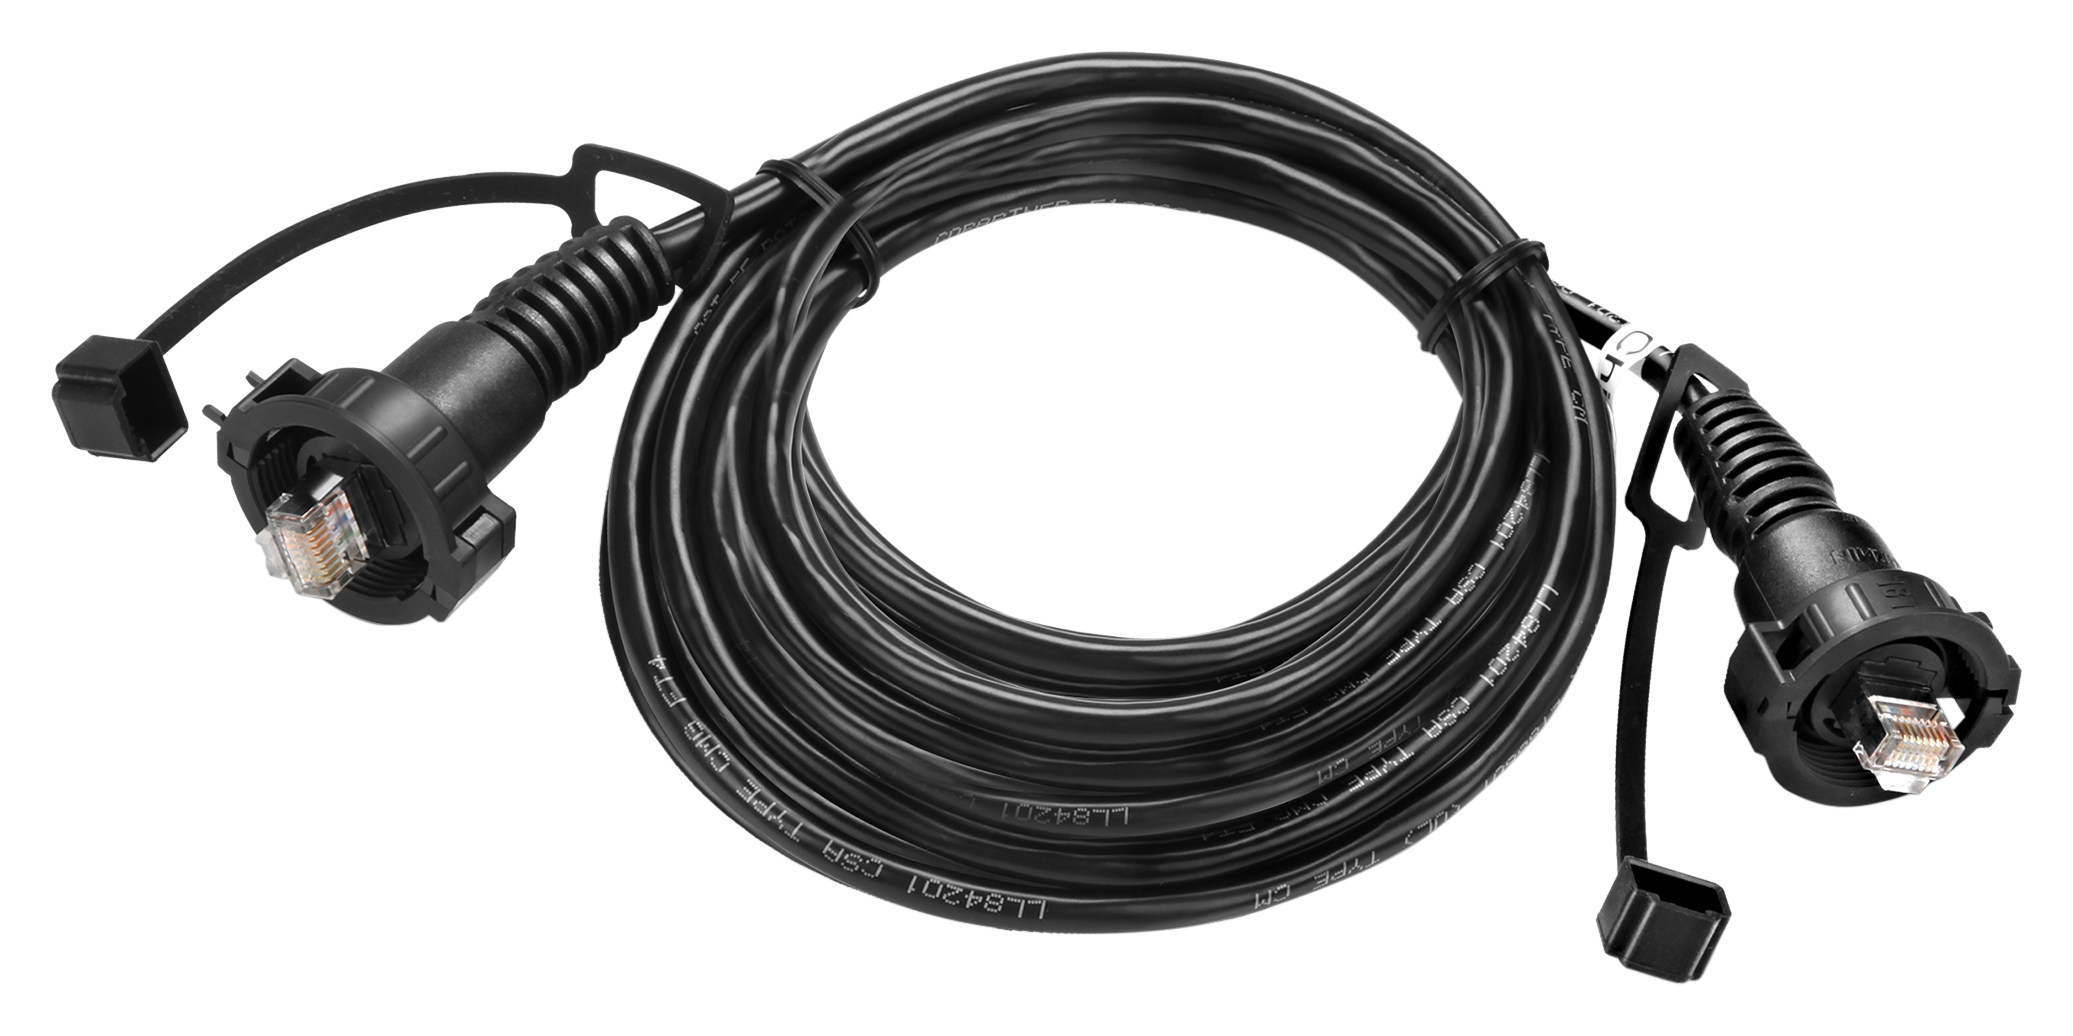 Garmin Marine Network adapter cable